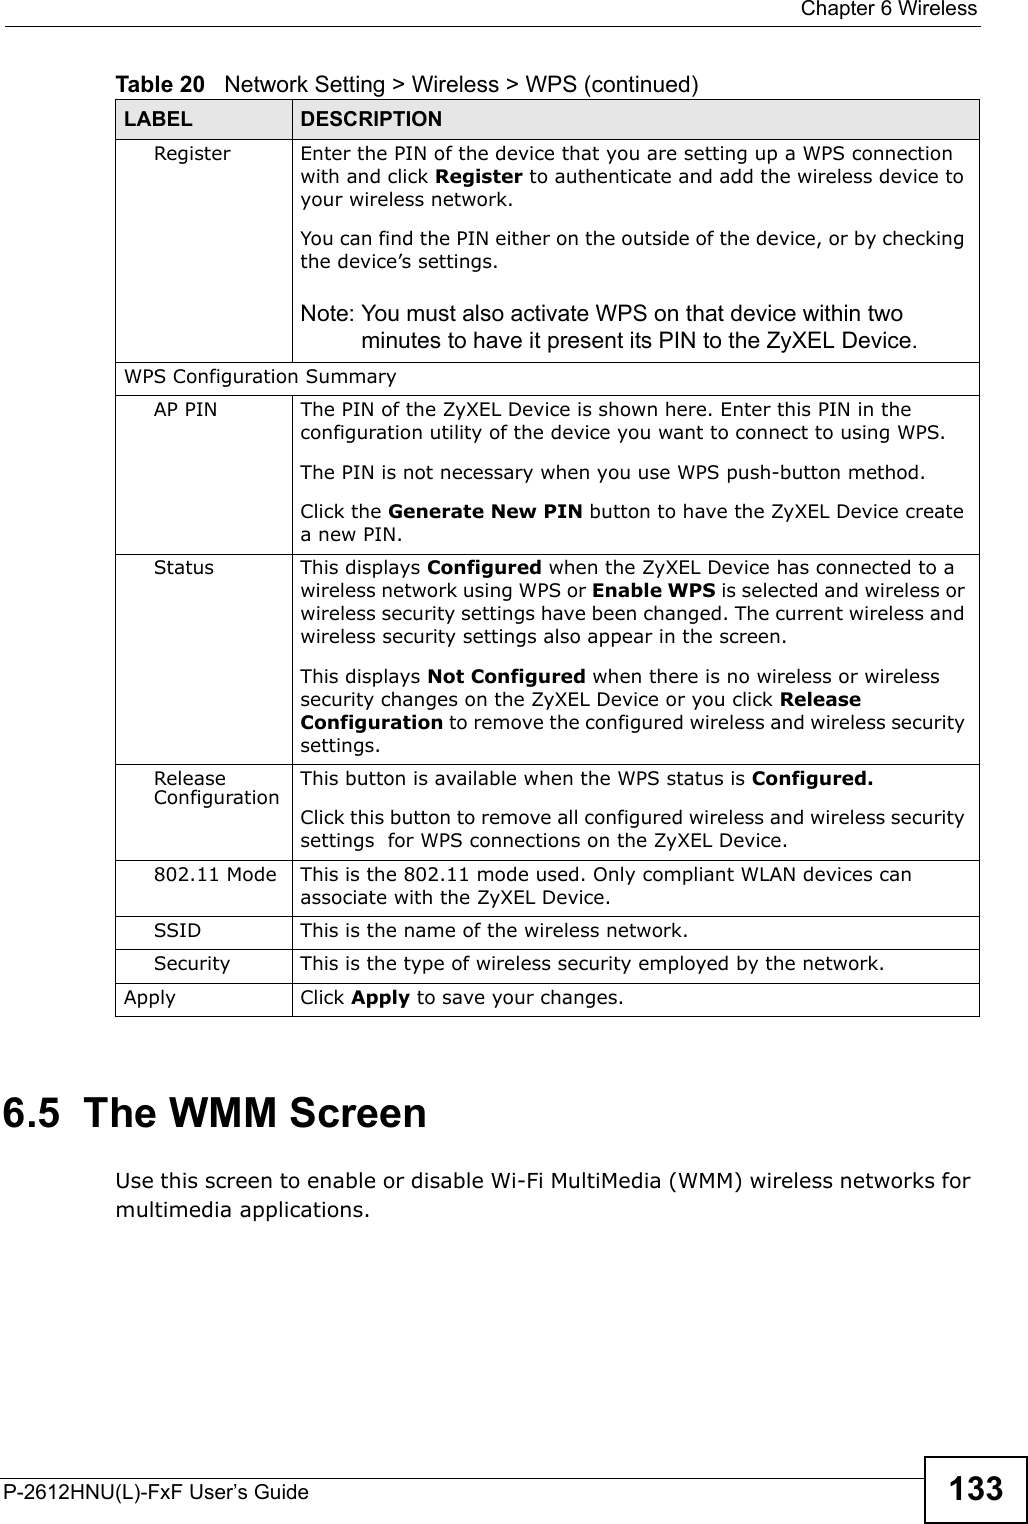  Chapter 6 WirelessP-2612HNU(L)-FxF User’s Guide 1336.5  The WMM ScreenUse this screen to enable or disable Wi-Fi MultiMedia (WMM) wireless networks for multimedia applications.Register Enter the PIN of the device that you are setting up a WPS connectionwith and click Register to authenticate and add the wireless device to your wireless network.You can find the PIN either on the outside of the device, or by checking the device’s settings.Note: You must also activate WPS on that device within two minutes to have it present its PIN to the ZyXEL Device.WPS Configuration SummaryAP PIN The PIN of the ZyXEL Device is shown here. Enter this PIN in the configuration utility of the device you want to connect to using WPS.The PIN is not necessary when you use WPS push-button method.Click the Generate New PIN button to have the ZyXEL Device createa new PIN.Status This displays Configured when the ZyXEL Device has connected to a wireless network using WPS or Enable WPS is selected and wireless or wireless security settings have been changed. The current wireless and wireless security settings also appear in the screen.This displays Not Configured when there is no wireless or wireless security changes on the ZyXEL Device or you click Release Configuration to remove the configured wireless and wireless securitysettings.ReleaseConfiguration This button is available when the WPS status is Configured.Click this button to remove all configured wireless and wireless securitysettings  for WPS connections on the ZyXEL Device.802.11 Mode This is the 802.11 mode used. Only compliant WLAN devices canassociate with the ZyXEL Device.SSID This is the name of the wireless network.Security This is the type of wireless security employed by the network.Apply Click Apply to save your changes.Table 20   Network Setting &gt; Wireless &gt; WPS (continued)LABEL DESCRIPTION